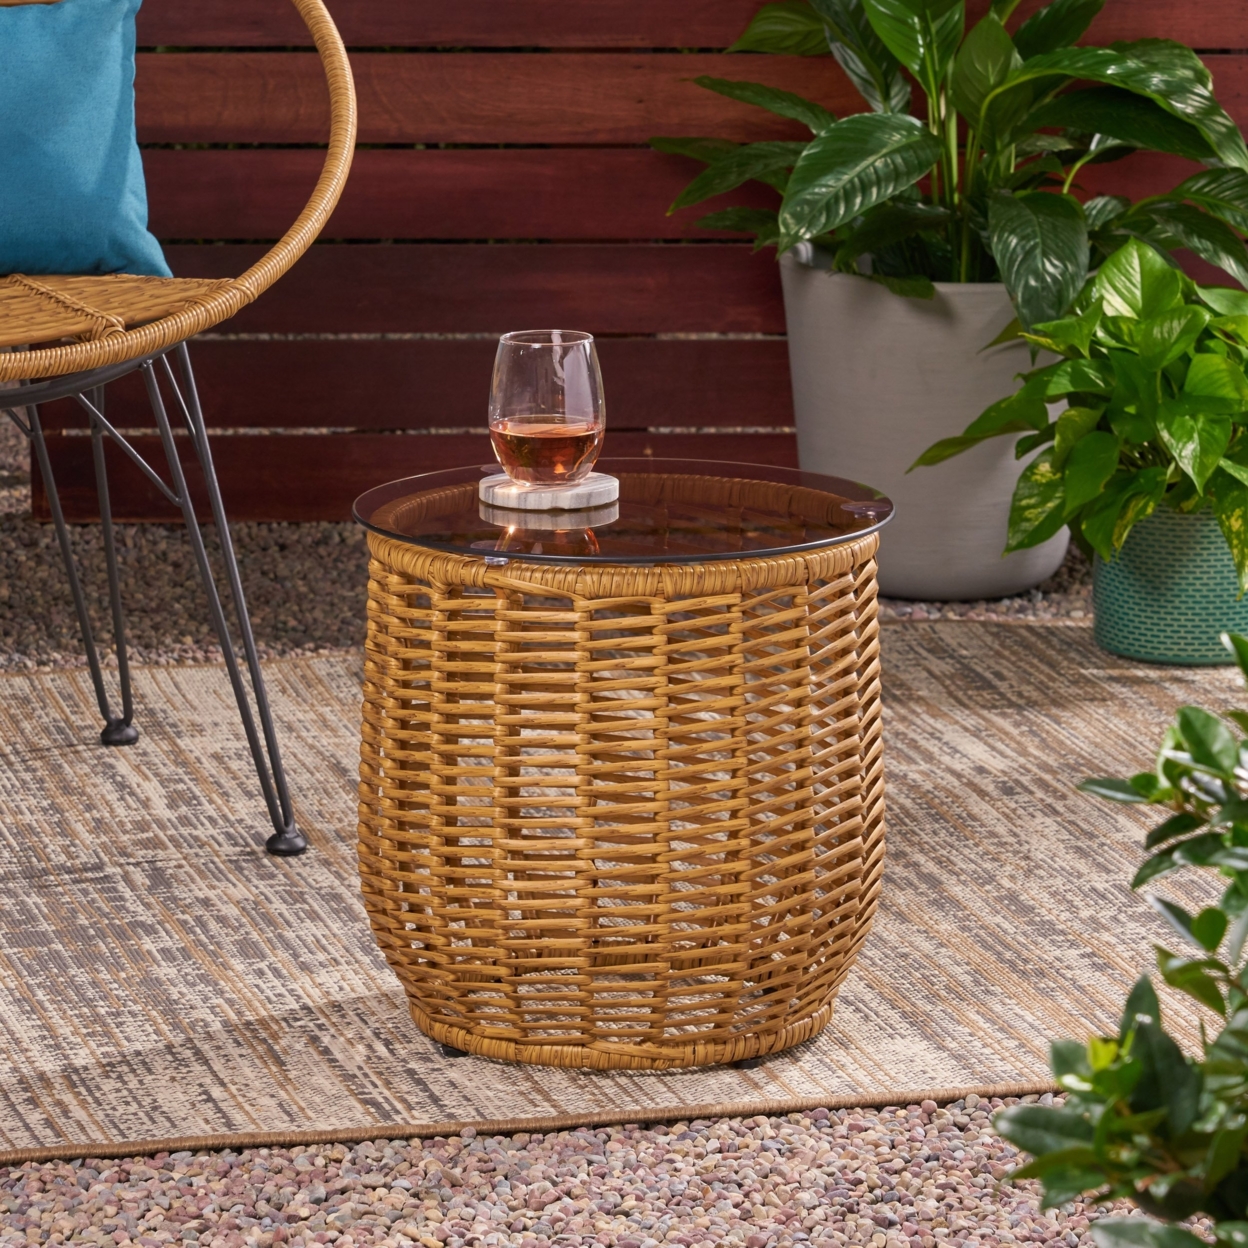 Ola Wicker Side Table With Tempered Glass Top - Light Brown Wicker